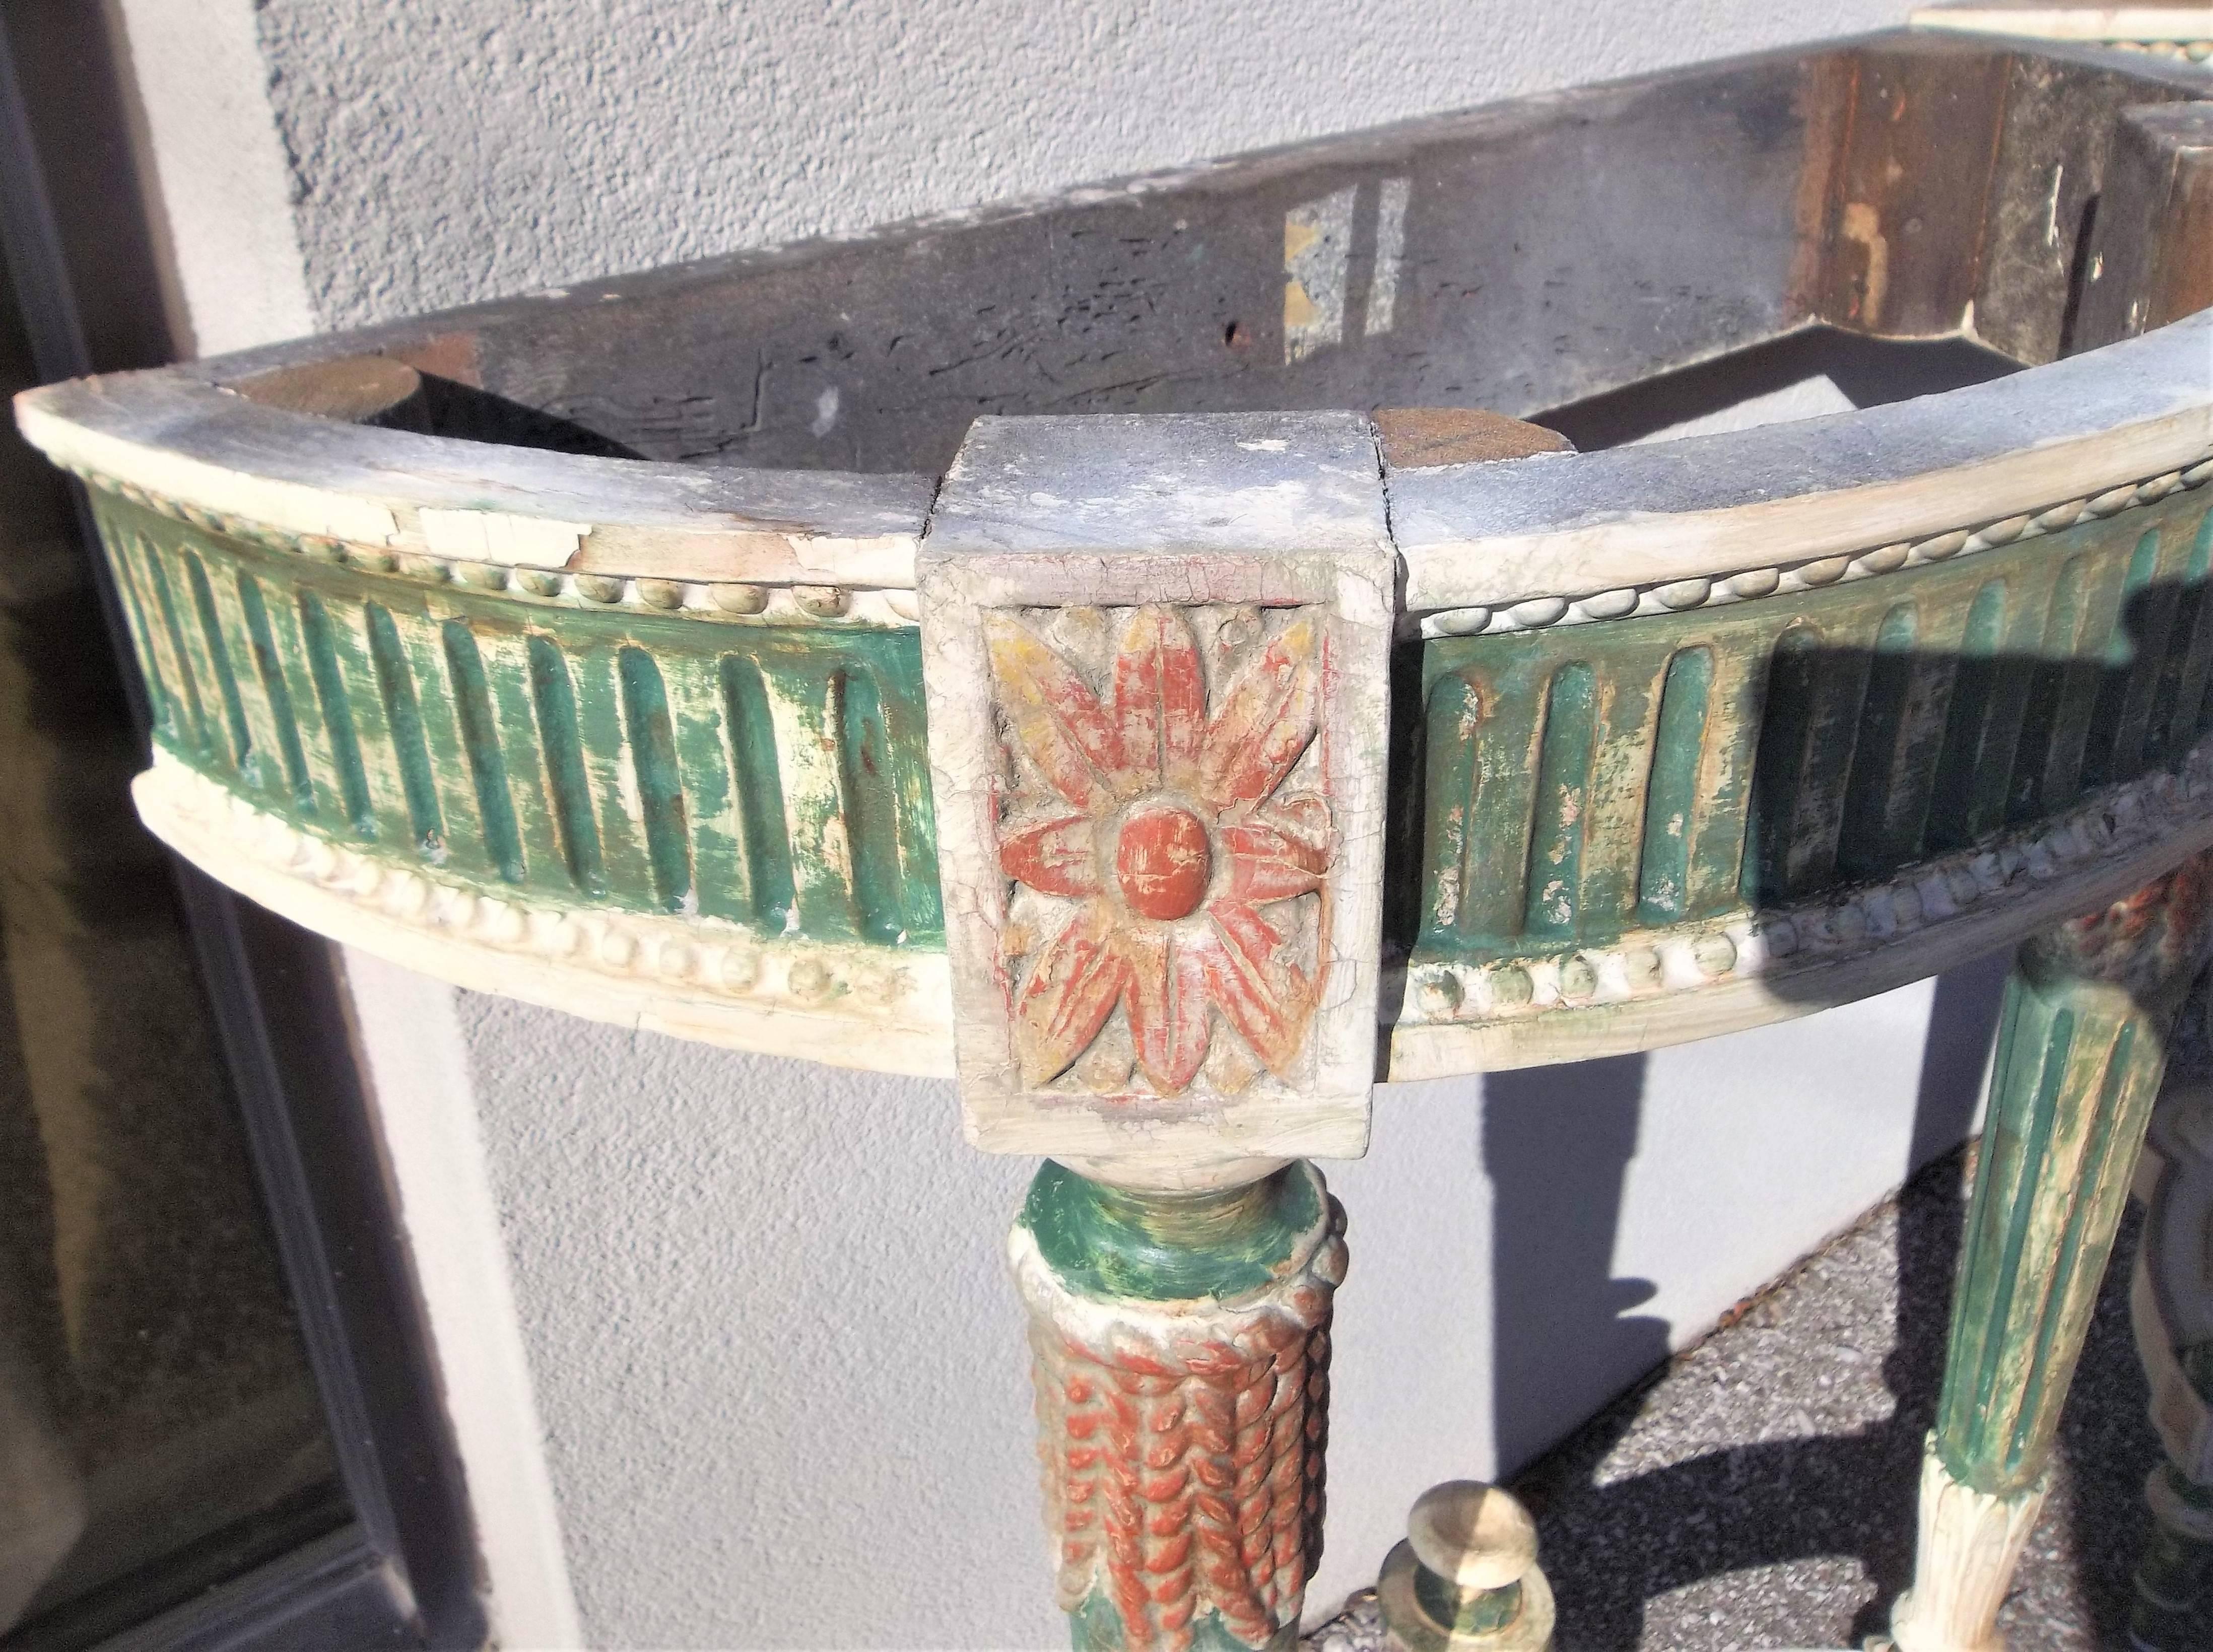 With well veined beveled marble tops in the color of orange sherbet. Each colorful console with intentional distressed paint , French green against cream . Gilt highlighted areas with Venetian red bole bleeding through. 

Good sturdy condition. 